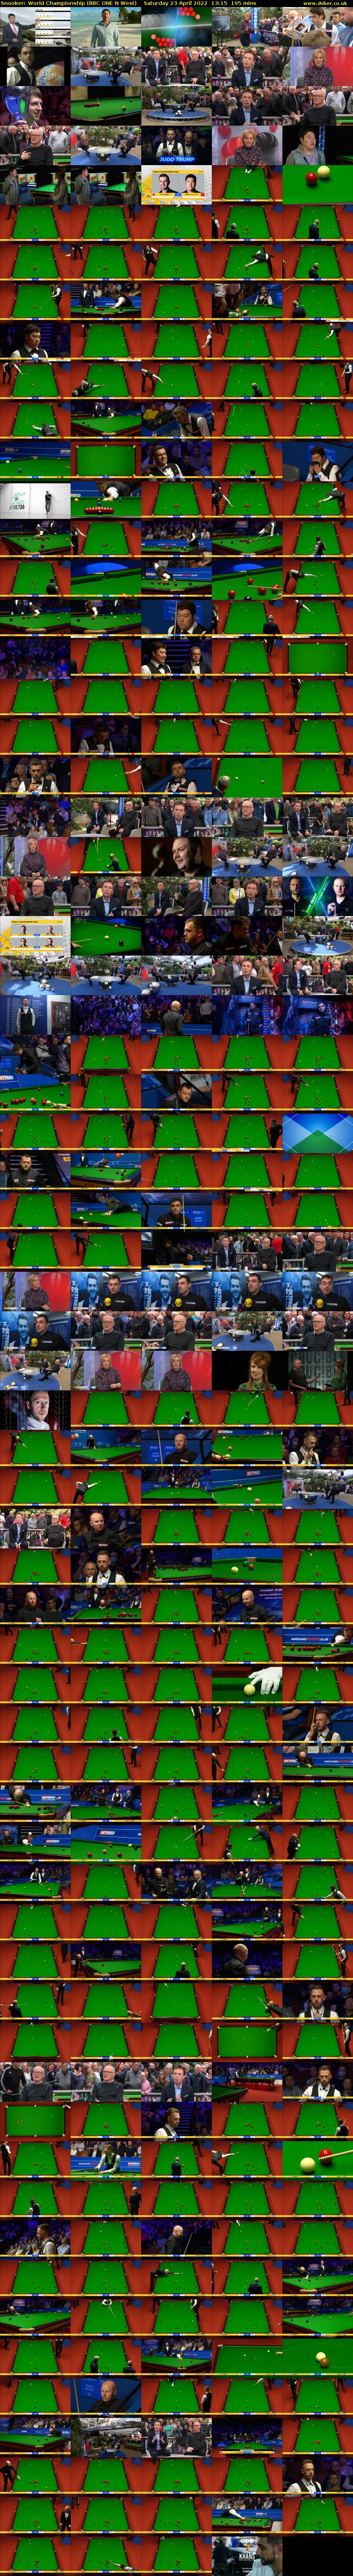 Snooker: World Championship (BBC ONE N West) Saturday 23 April 2022 13:15 - 16:30